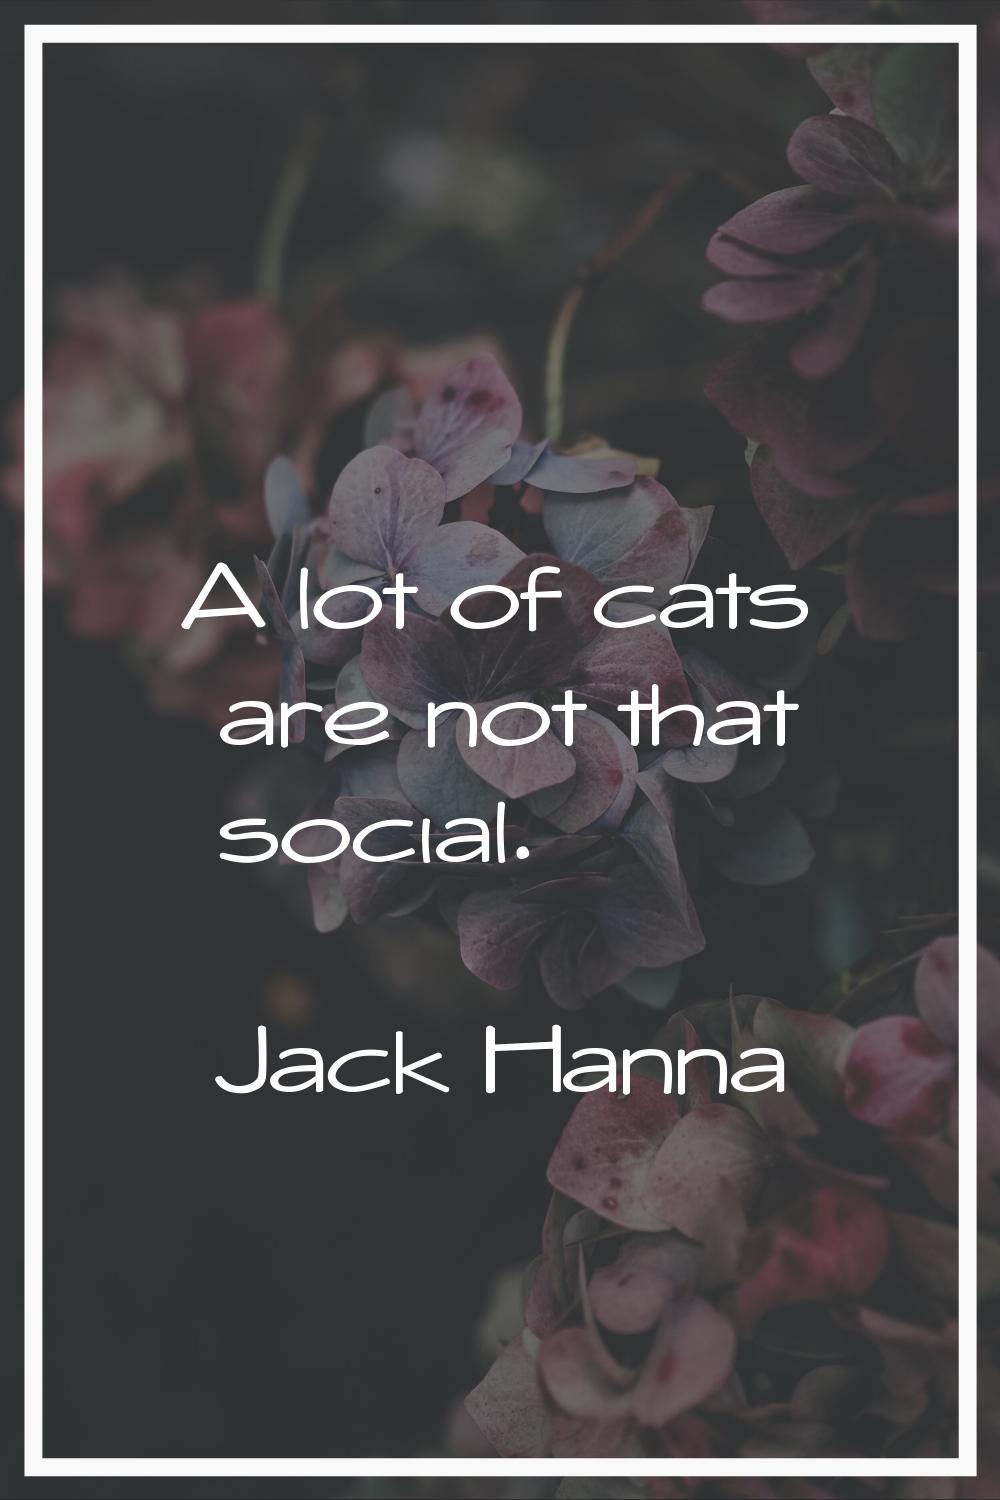 A lot of cats are not that social.